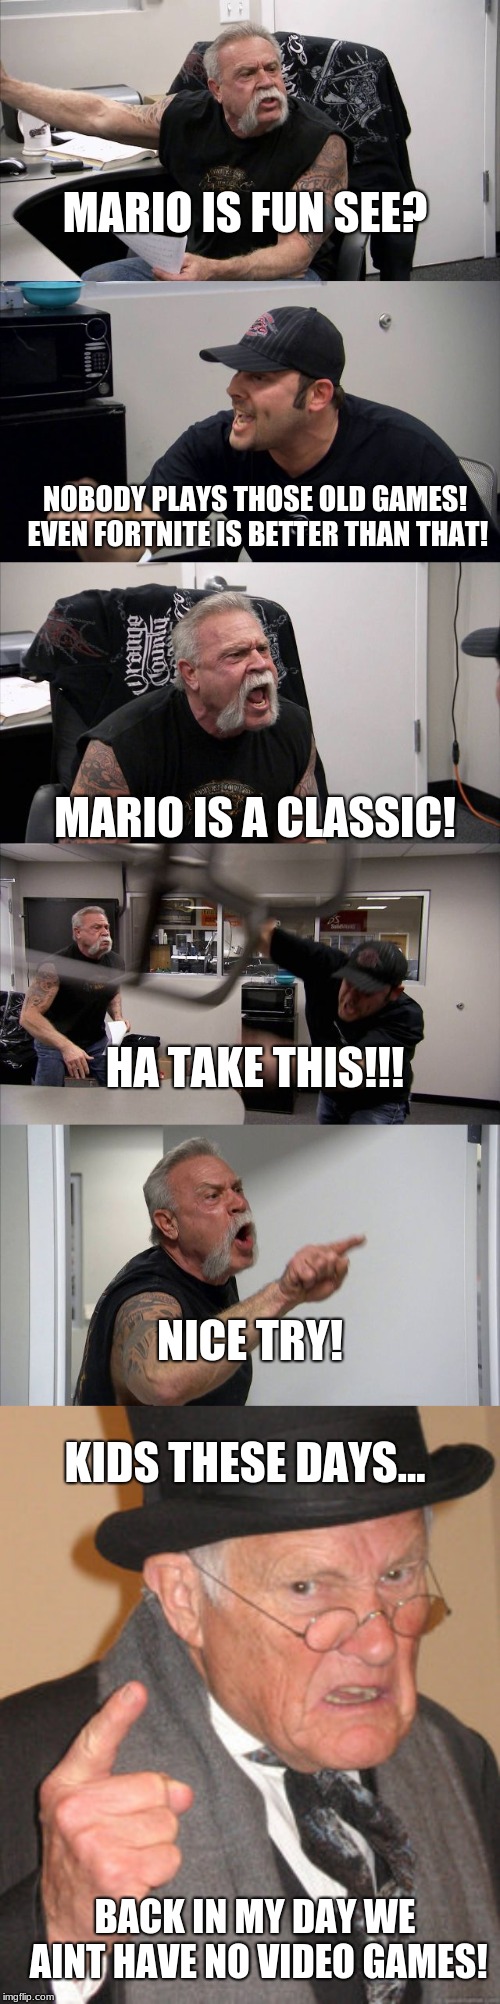 MARIO IS FUN SEE? NOBODY PLAYS THOSE OLD GAMES! EVEN FORTNITE IS BETTER THAN THAT! MARIO IS A CLASSIC! HA TAKE THIS!!! NICE TRY! KIDS THESE DAYS... BACK IN MY DAY WE AINT HAVE NO VIDEO GAMES! | image tagged in memes,back in my day,american chopper argument | made w/ Imgflip meme maker